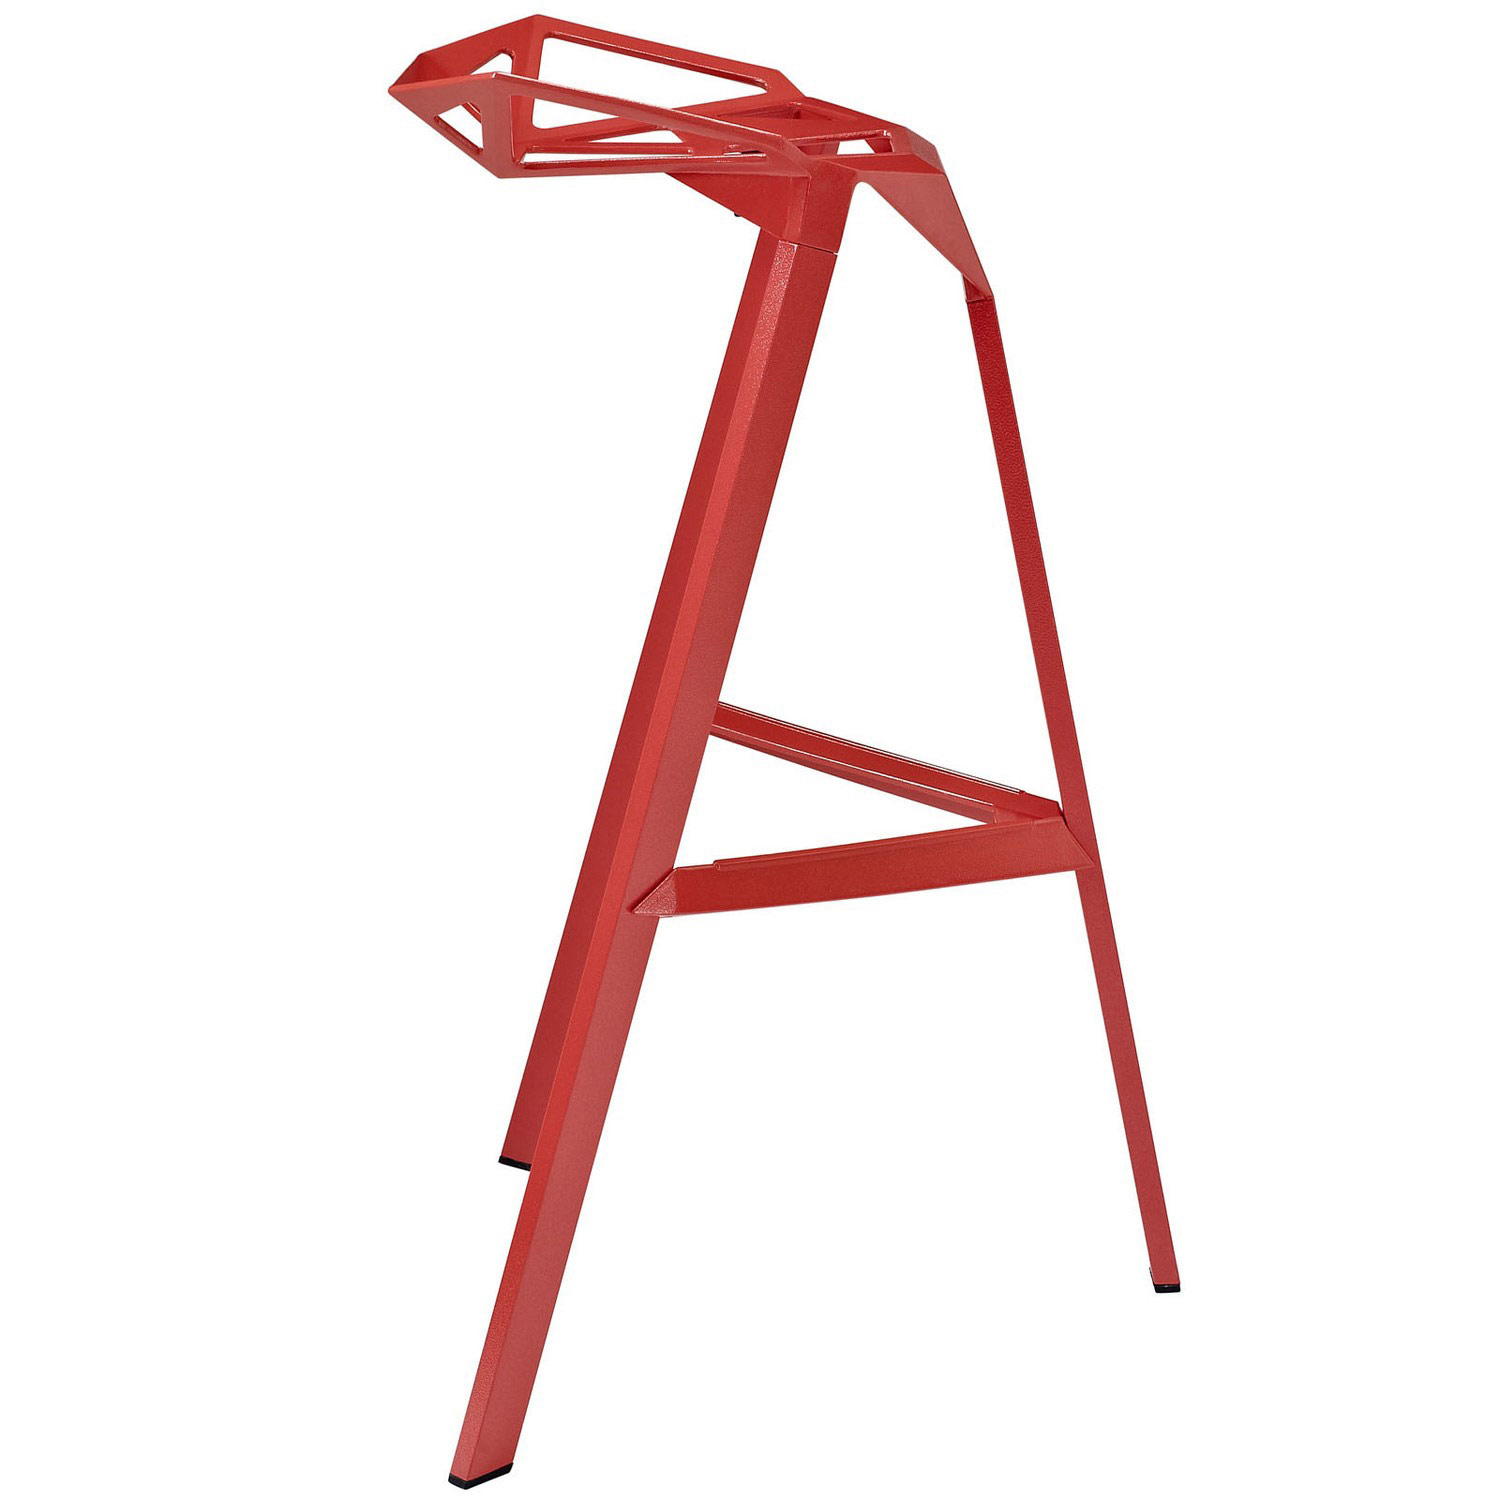 Modway Launch Stacking Bar Stool Set of 4 - Red